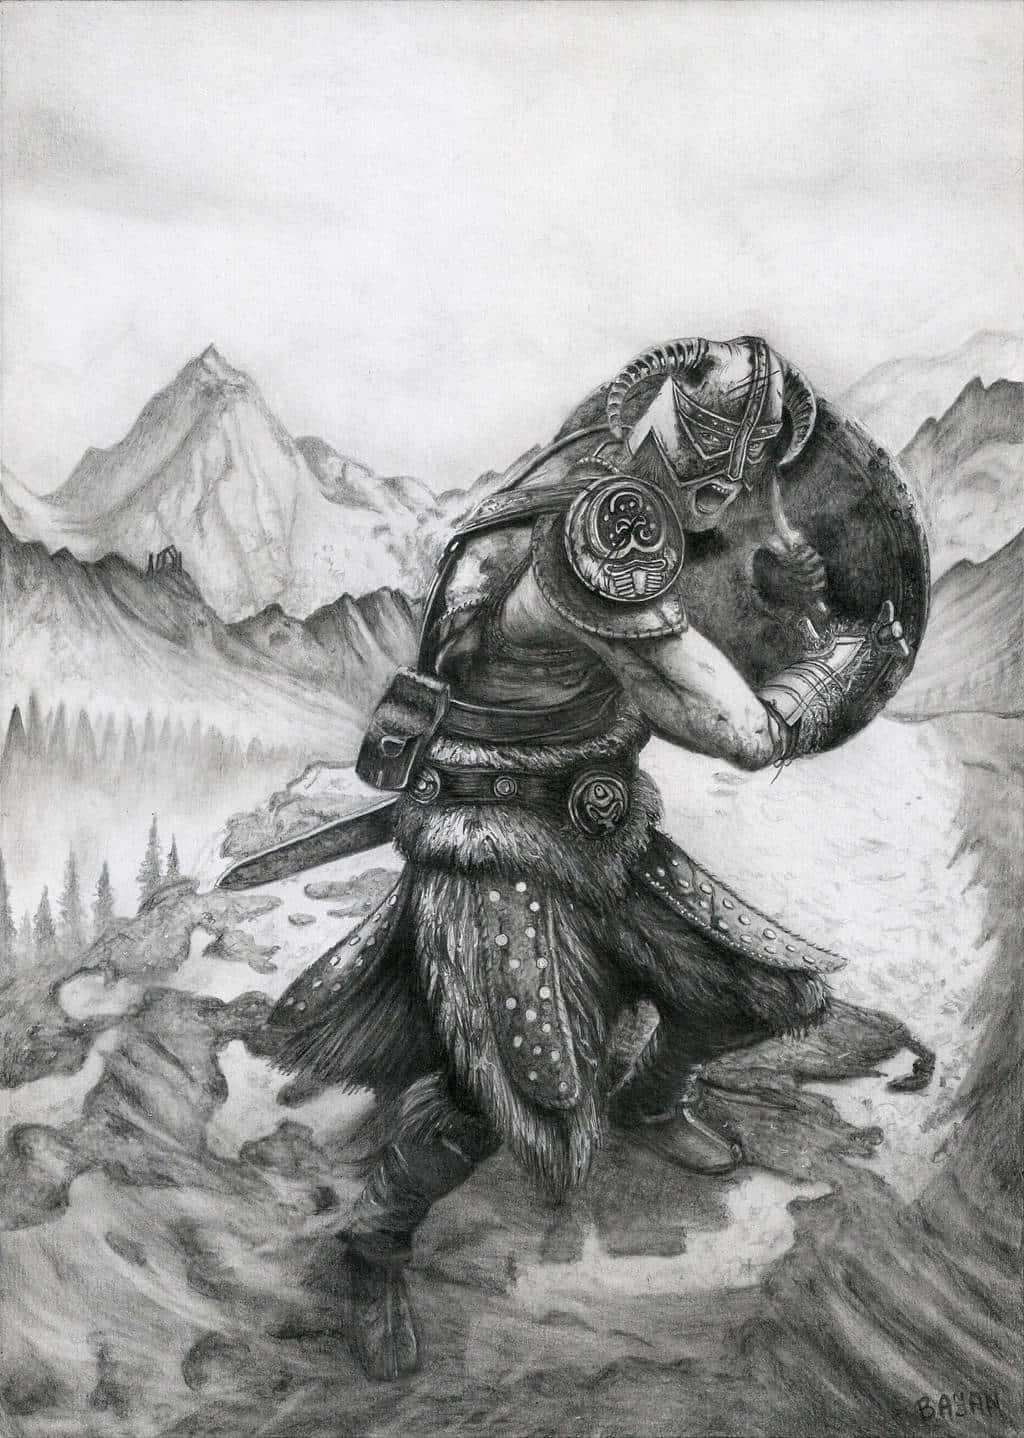 The Legendary Dovahkiin In Action Background